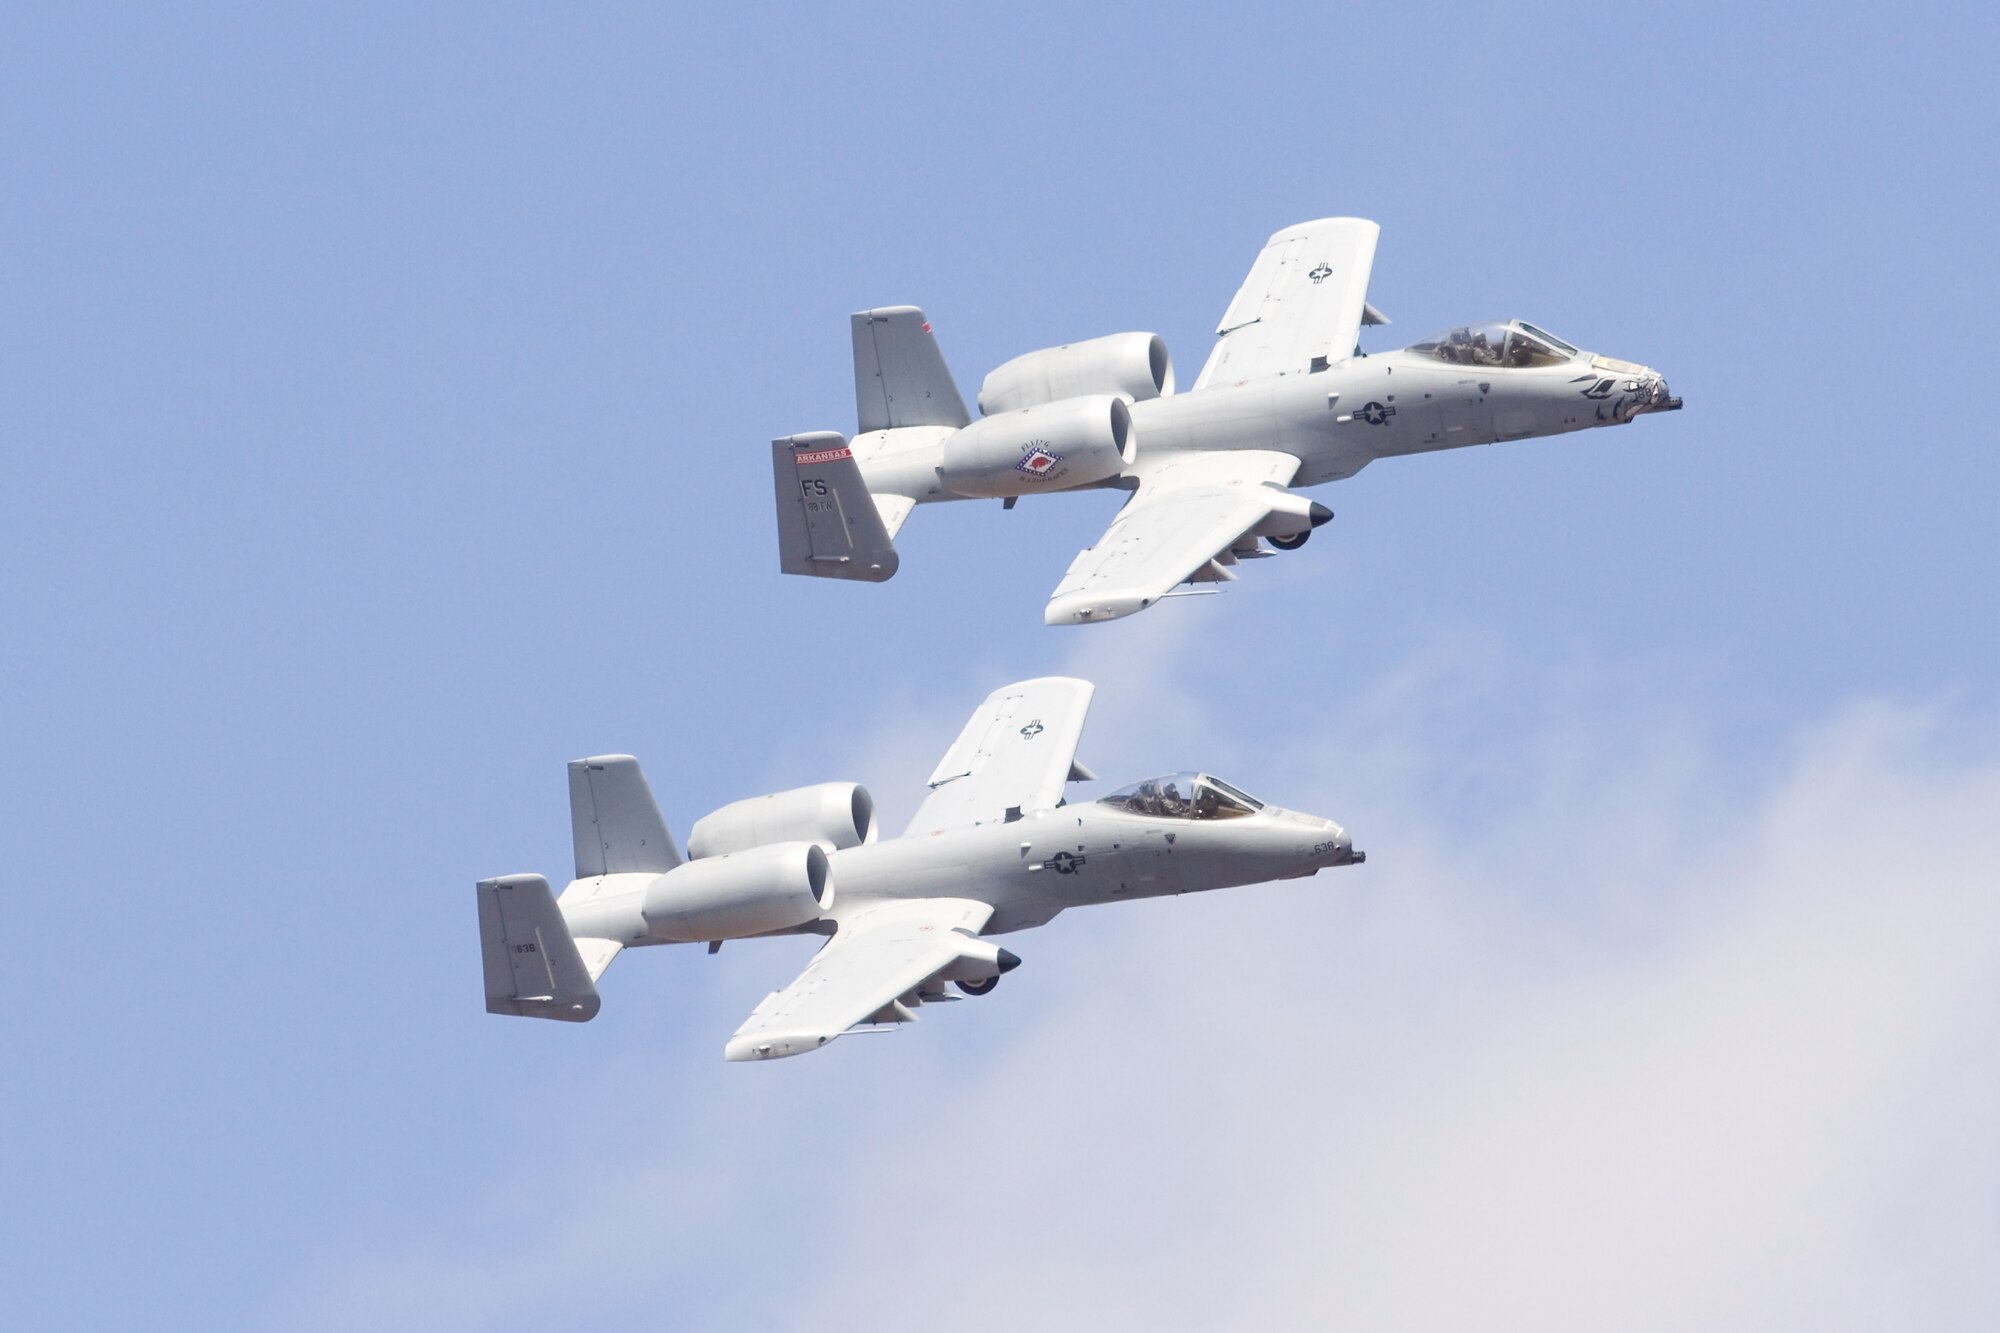 Lt. Col. Marty Dahlem (Tail No. 638) and Maj. Doug Davis (Tail No. 188), pilots with the 188th Fighter Wing, train at the 188th’s Detachment 1 Razorback Range March 25, 2014, during their fini flights in the A-10C Thunderbolt II “Warthog.” Dahlem is the 188th Operations Support Squadron commander and Davis is the 188th Detachment 1 commander. (Courtesy photo by Nick Thomas)